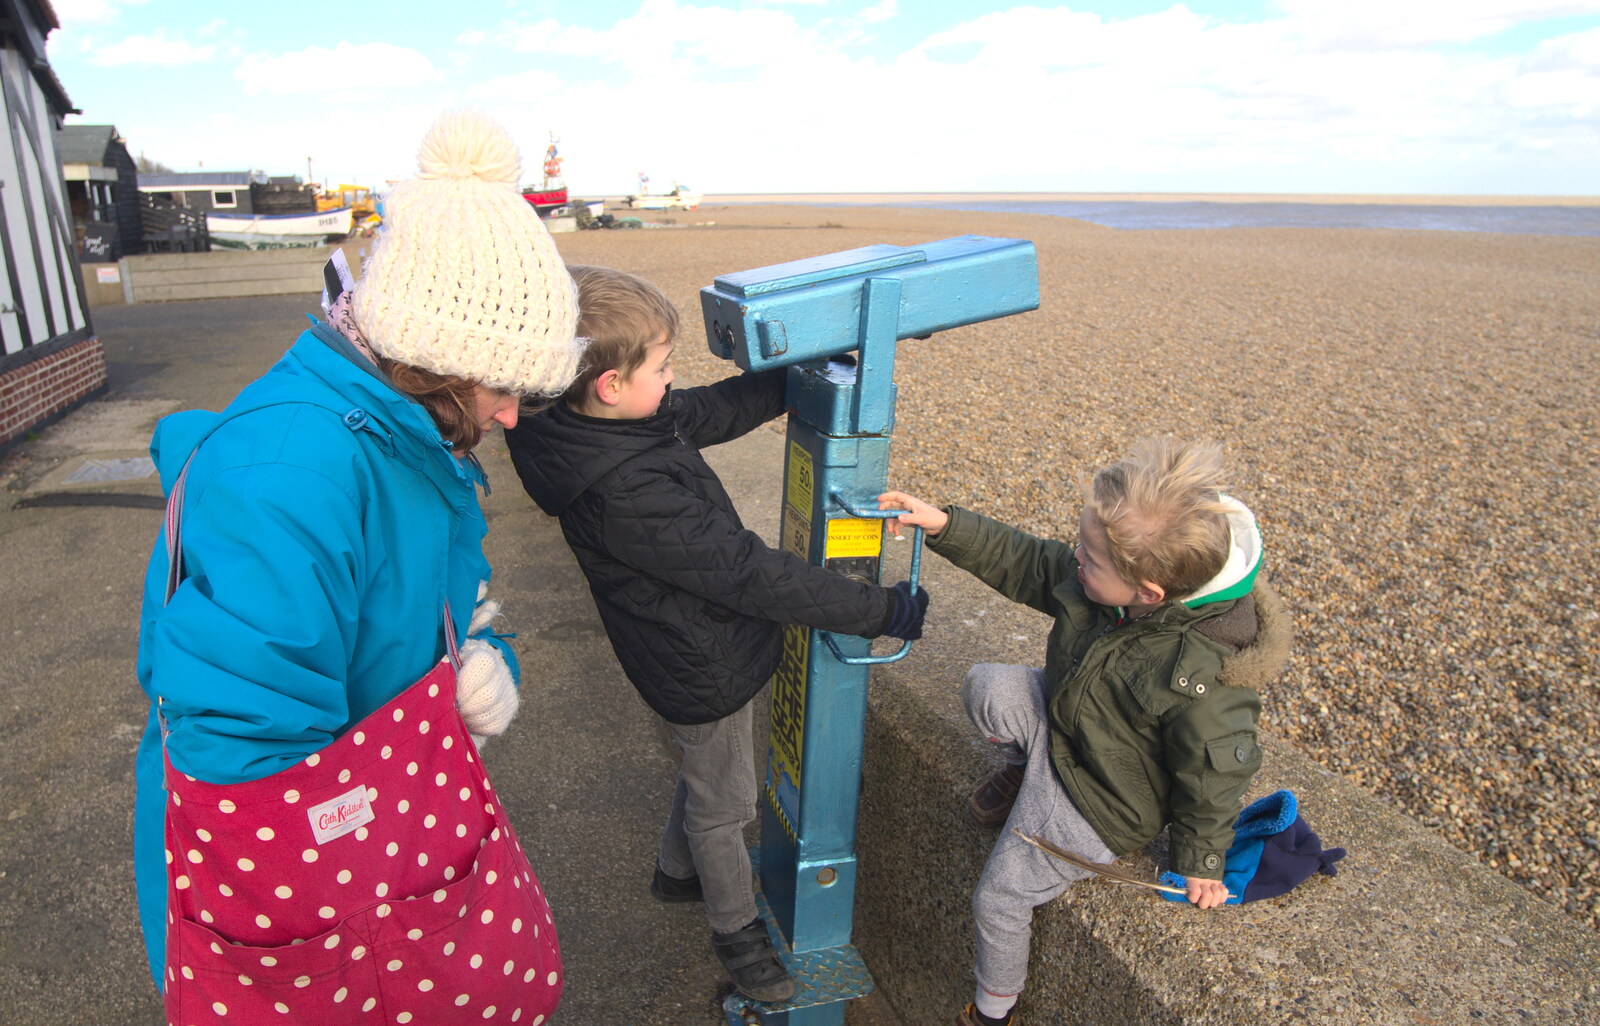 A Trip to Aldeburgh, Suffolk - 7th February 2016: The boys play with a telescope